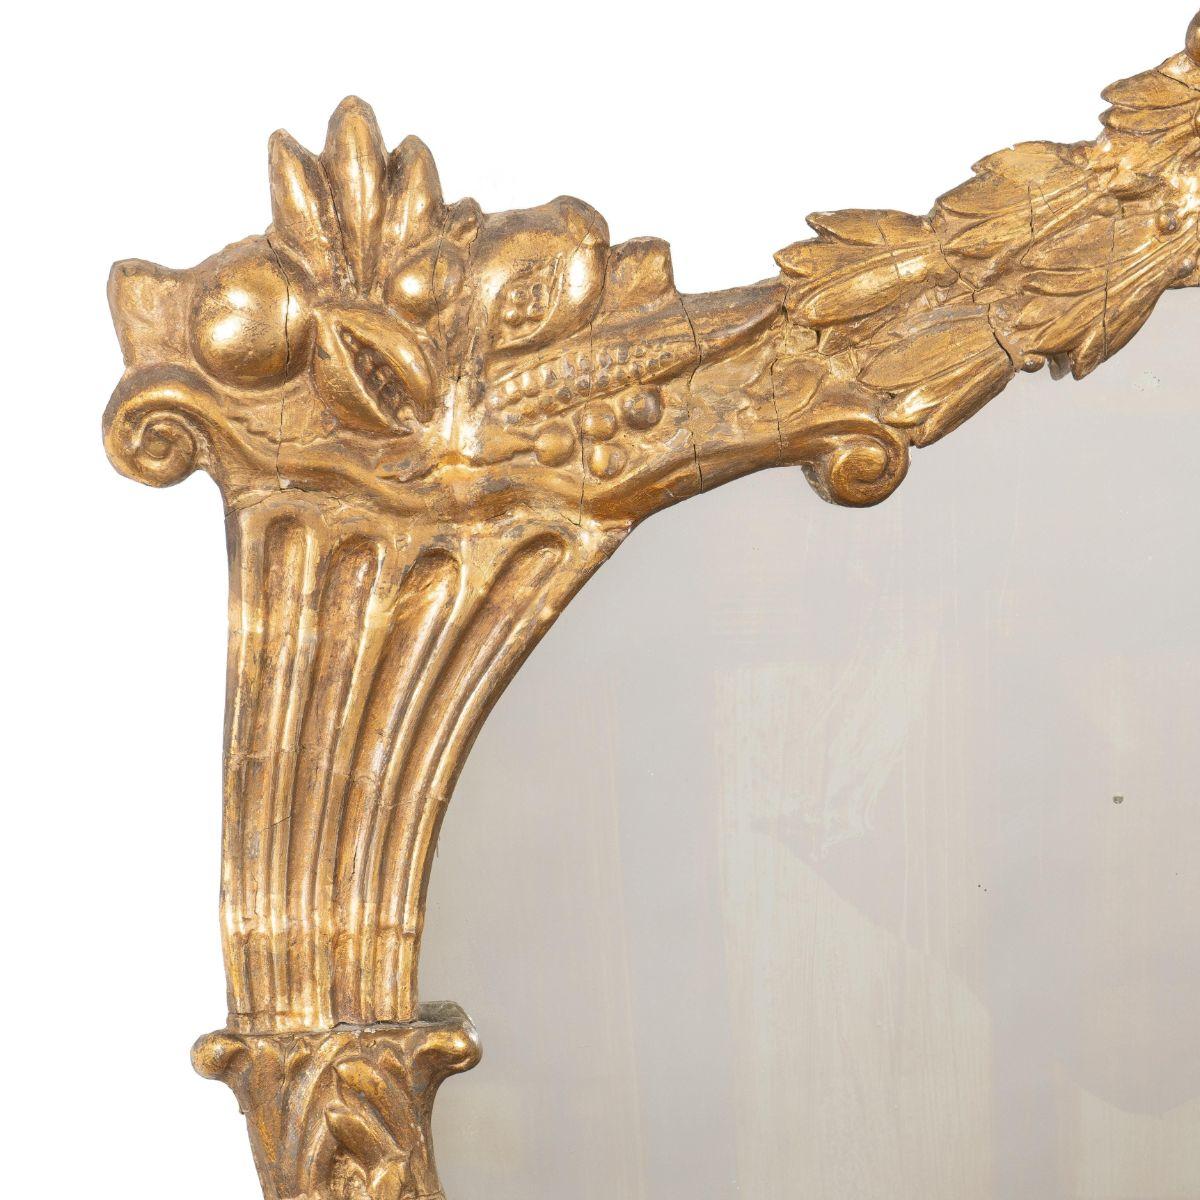 19th Century American Oval Gilt Gesso Mirror Frame with Eagle Crest In Good Condition For Sale In Kenilworth, IL